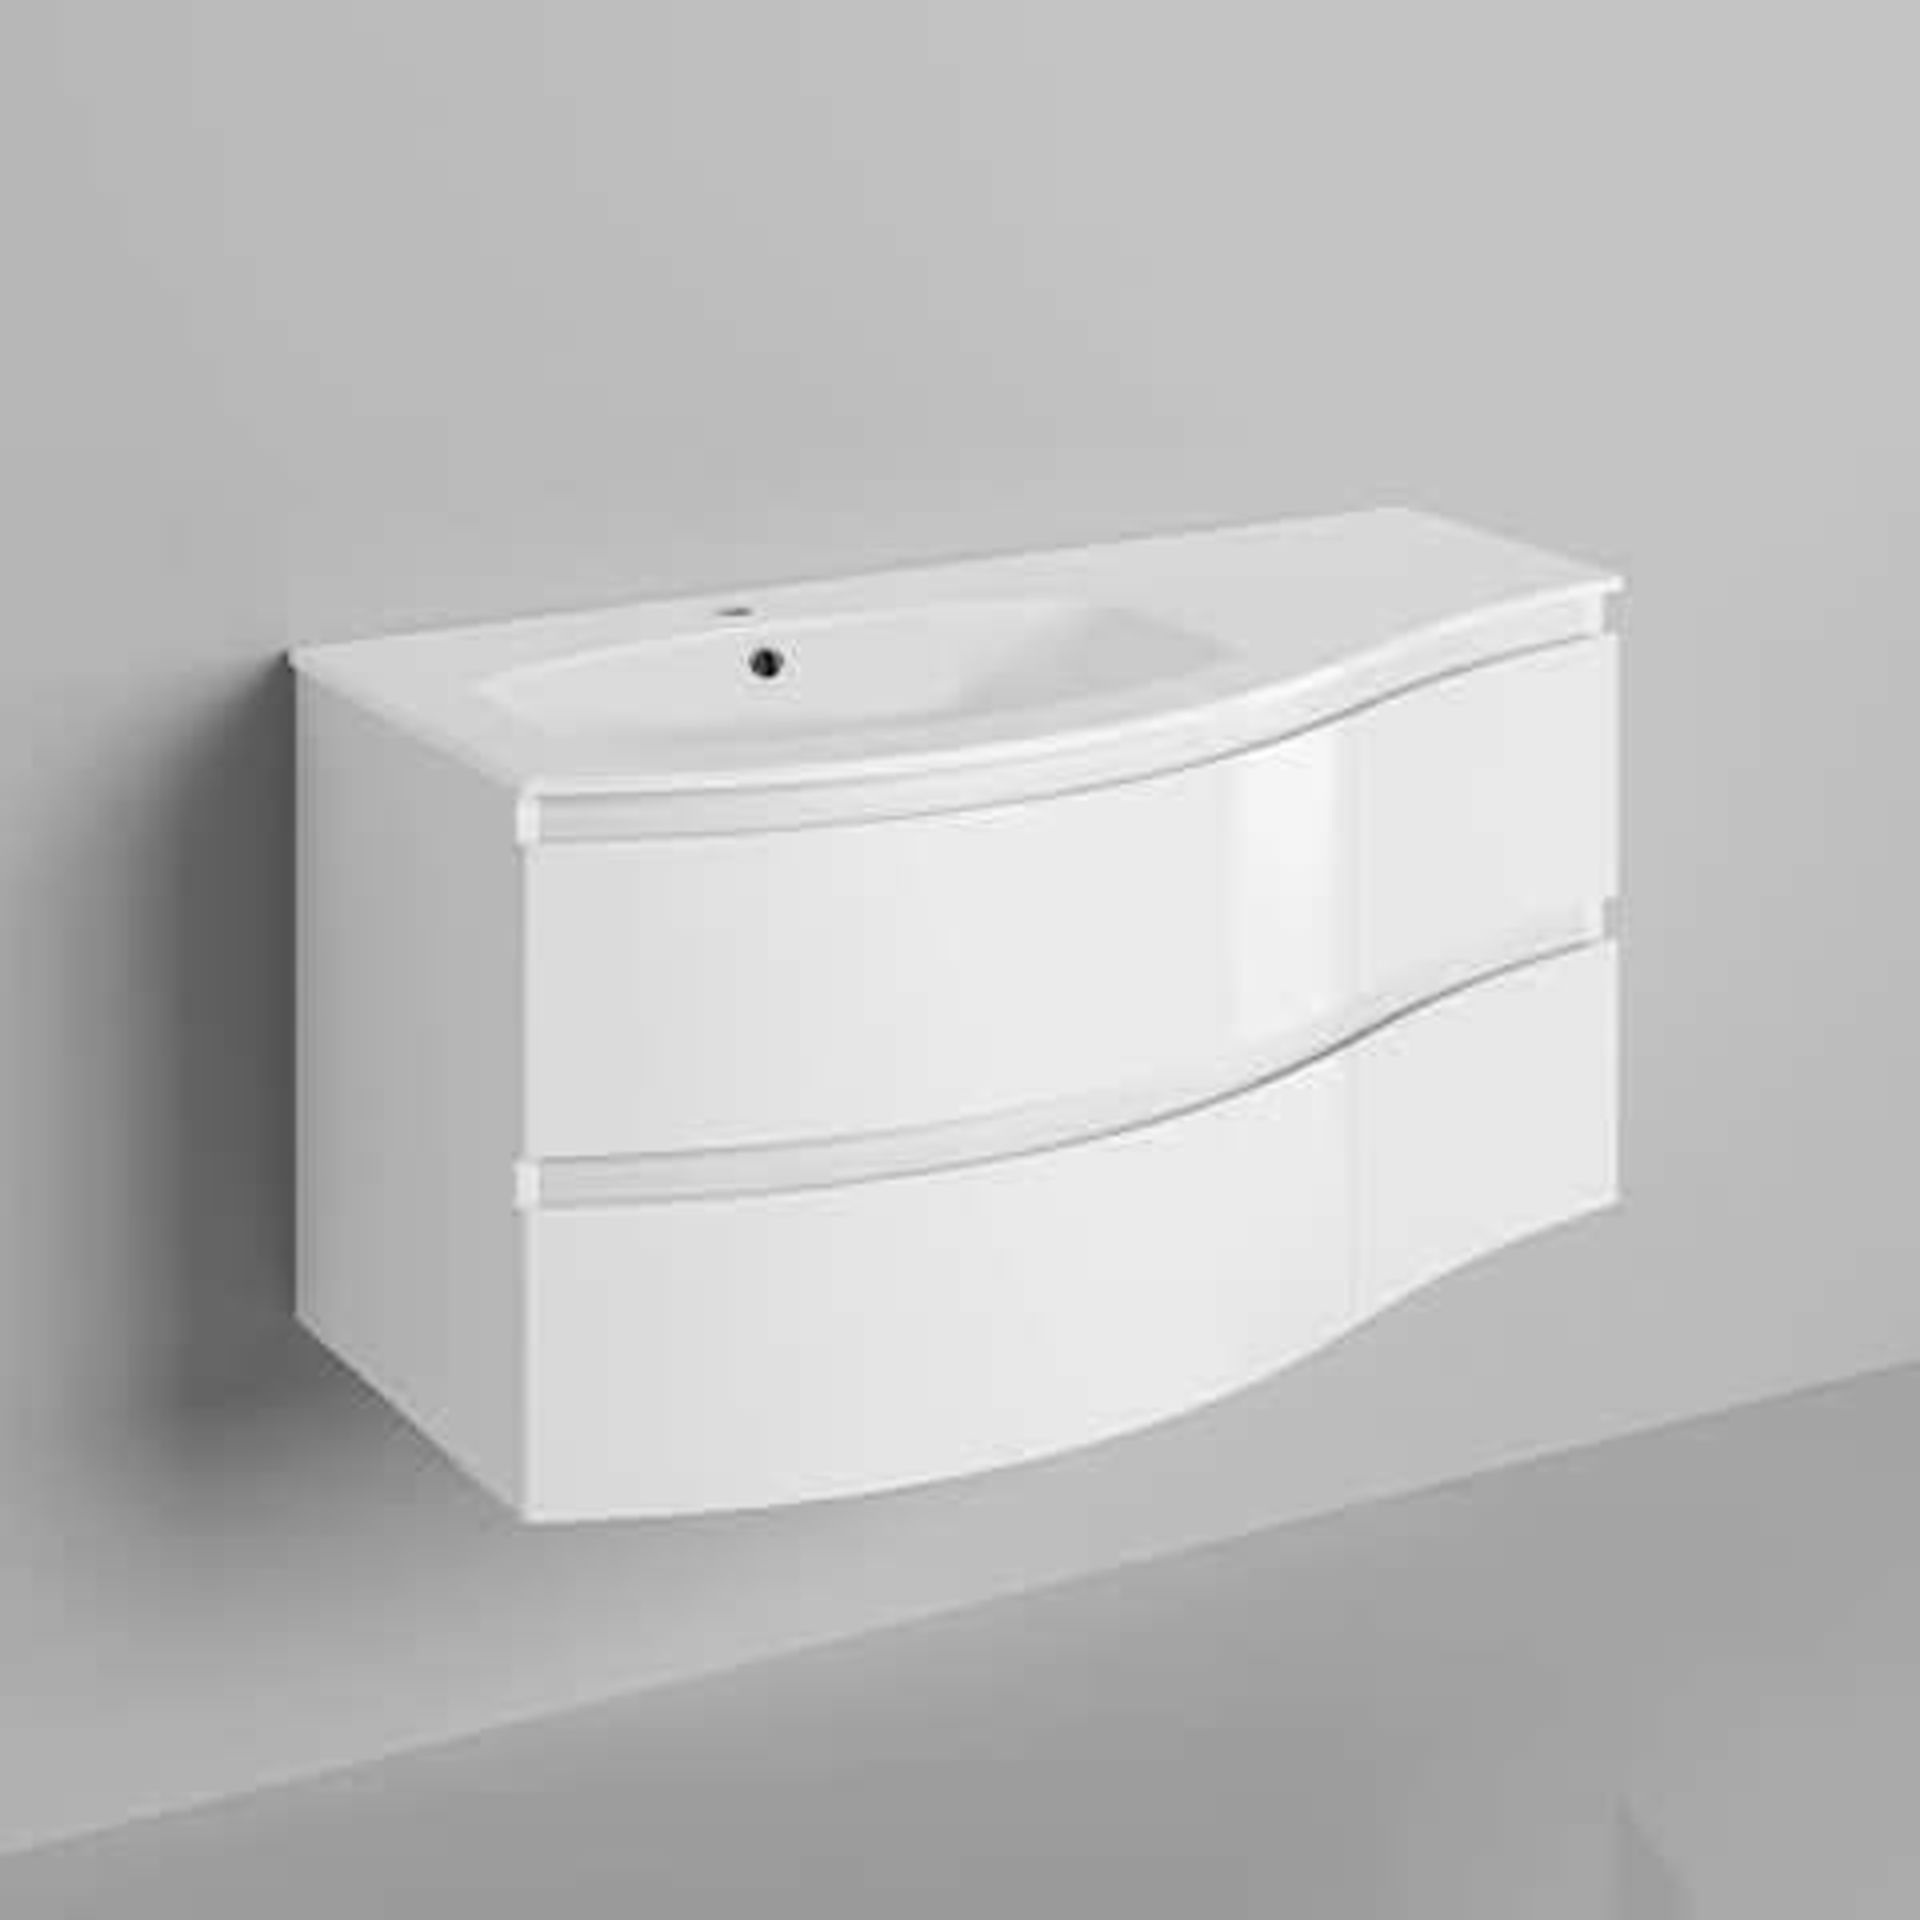 (W318) 1040mm Amelie High Gloss White Curved Vanity Unit - Left Hand - Wall Hung. RRP £1,249. - Image 4 of 4